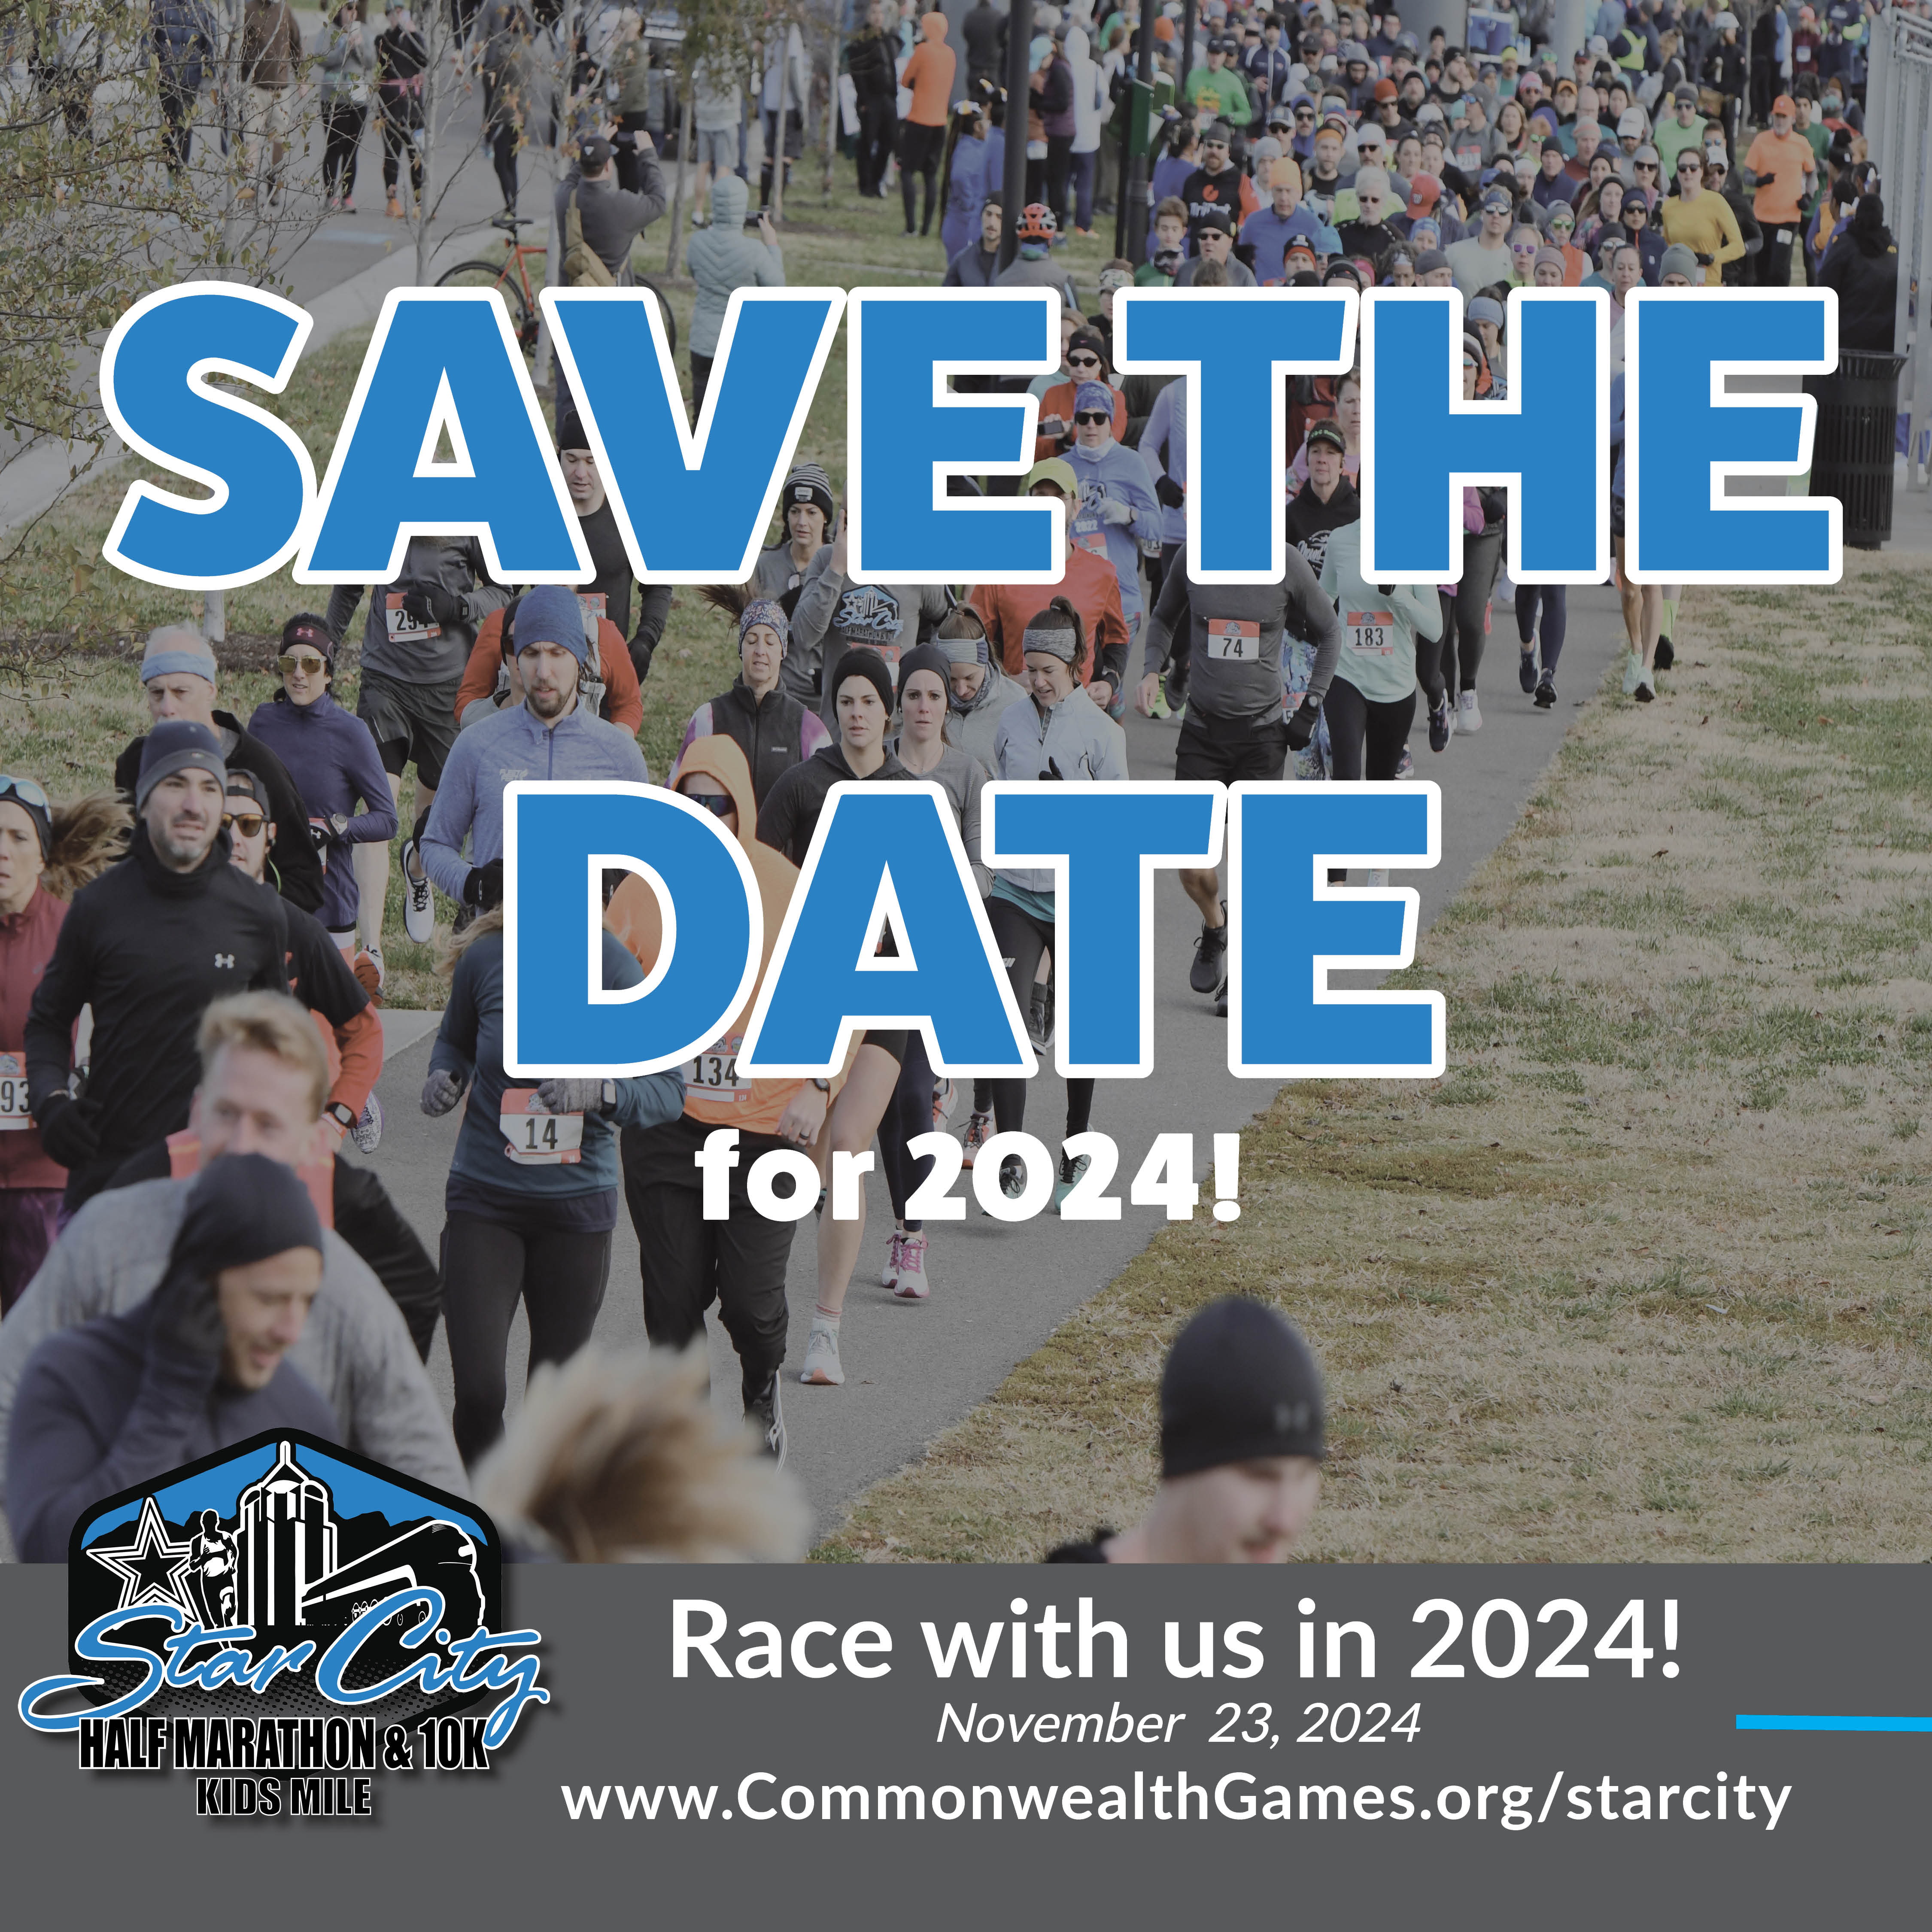 Sponsor Save the Date for 2024